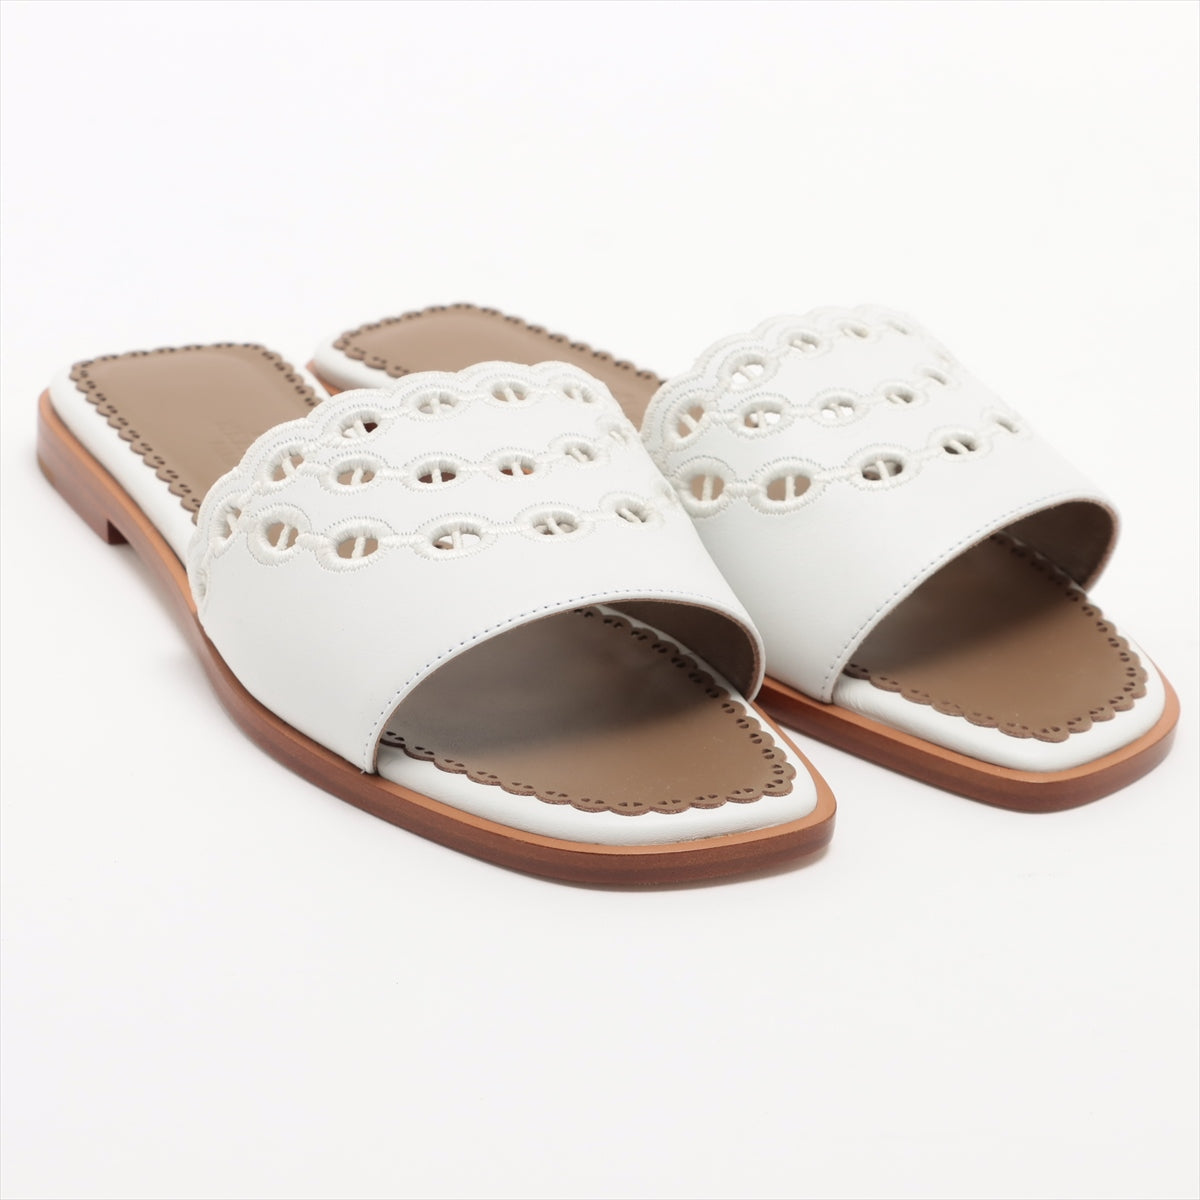 Hermès Leather Sandals 35 Ladies' White x brown frog box There is a bag